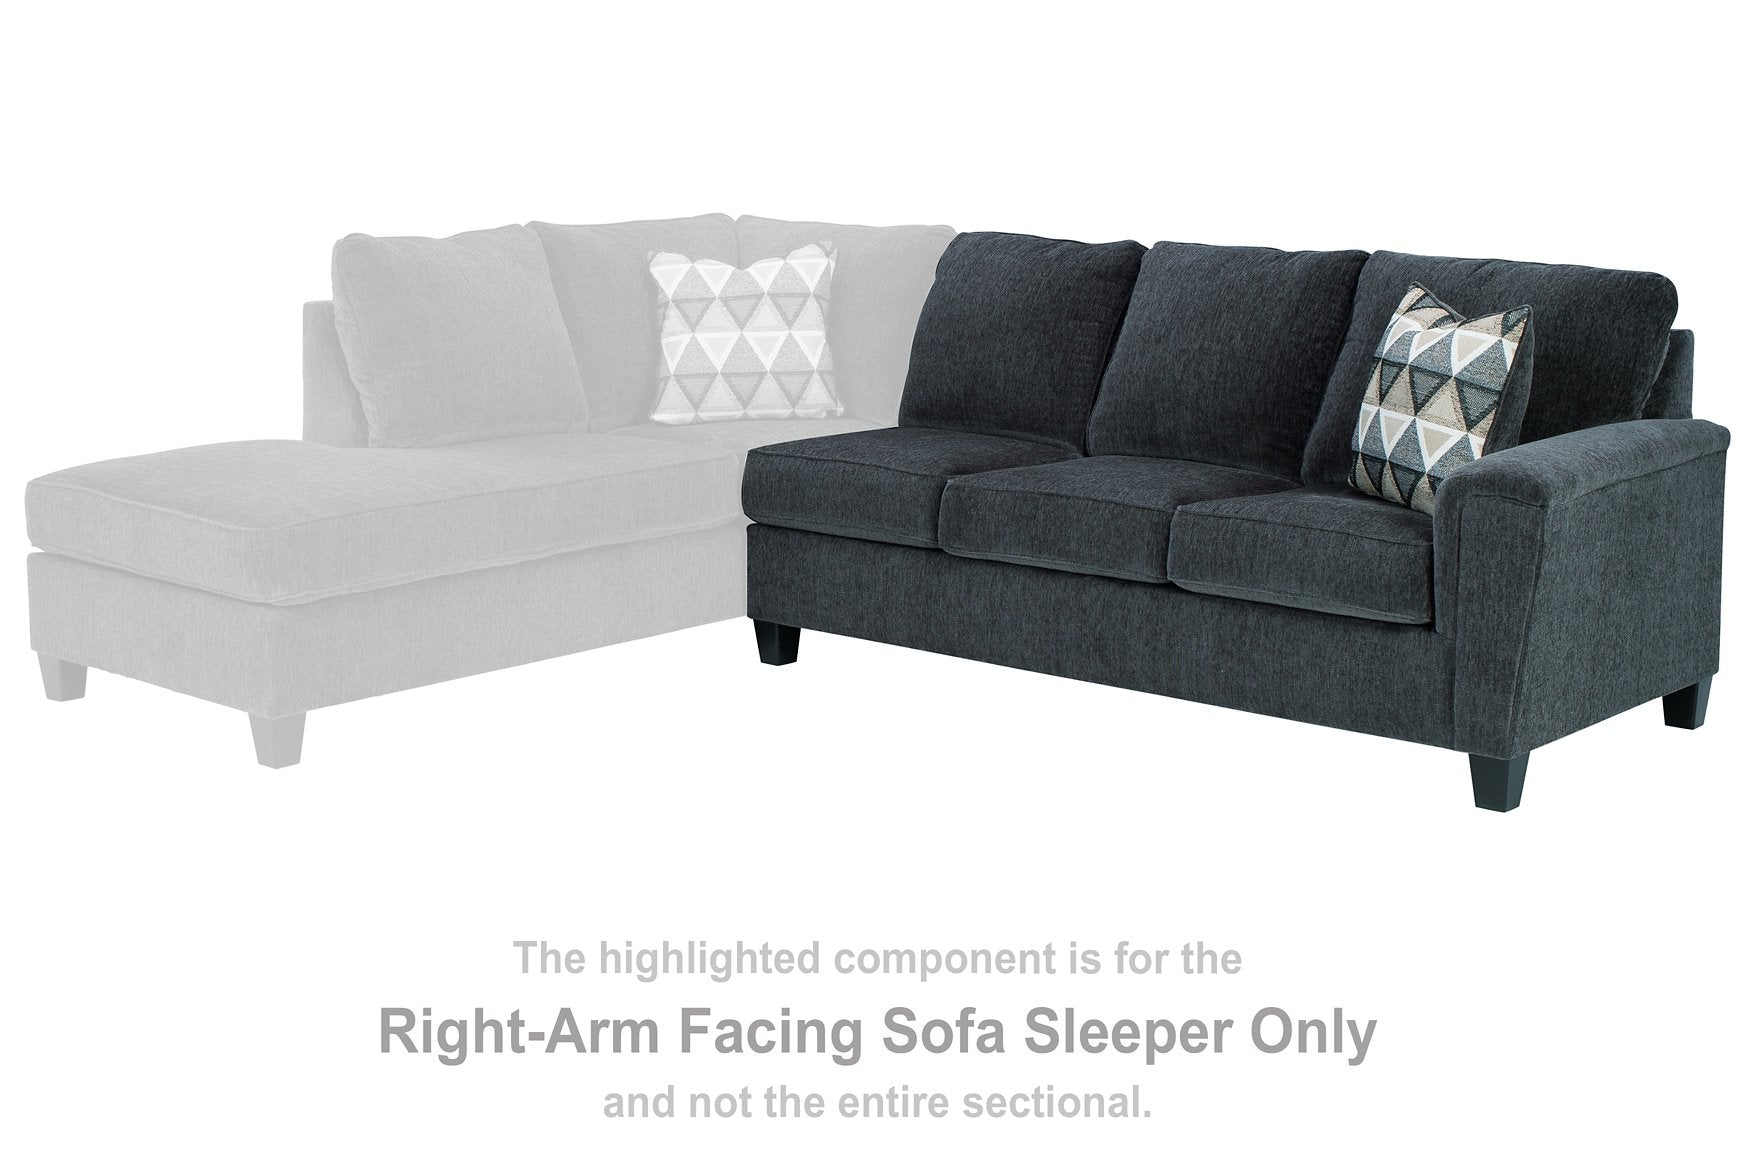 Abinger 2-Piece Sleeper Sectional with Chaise Abinger 2-Piece Sleeper Sectional with Chaise Half Price Furniture